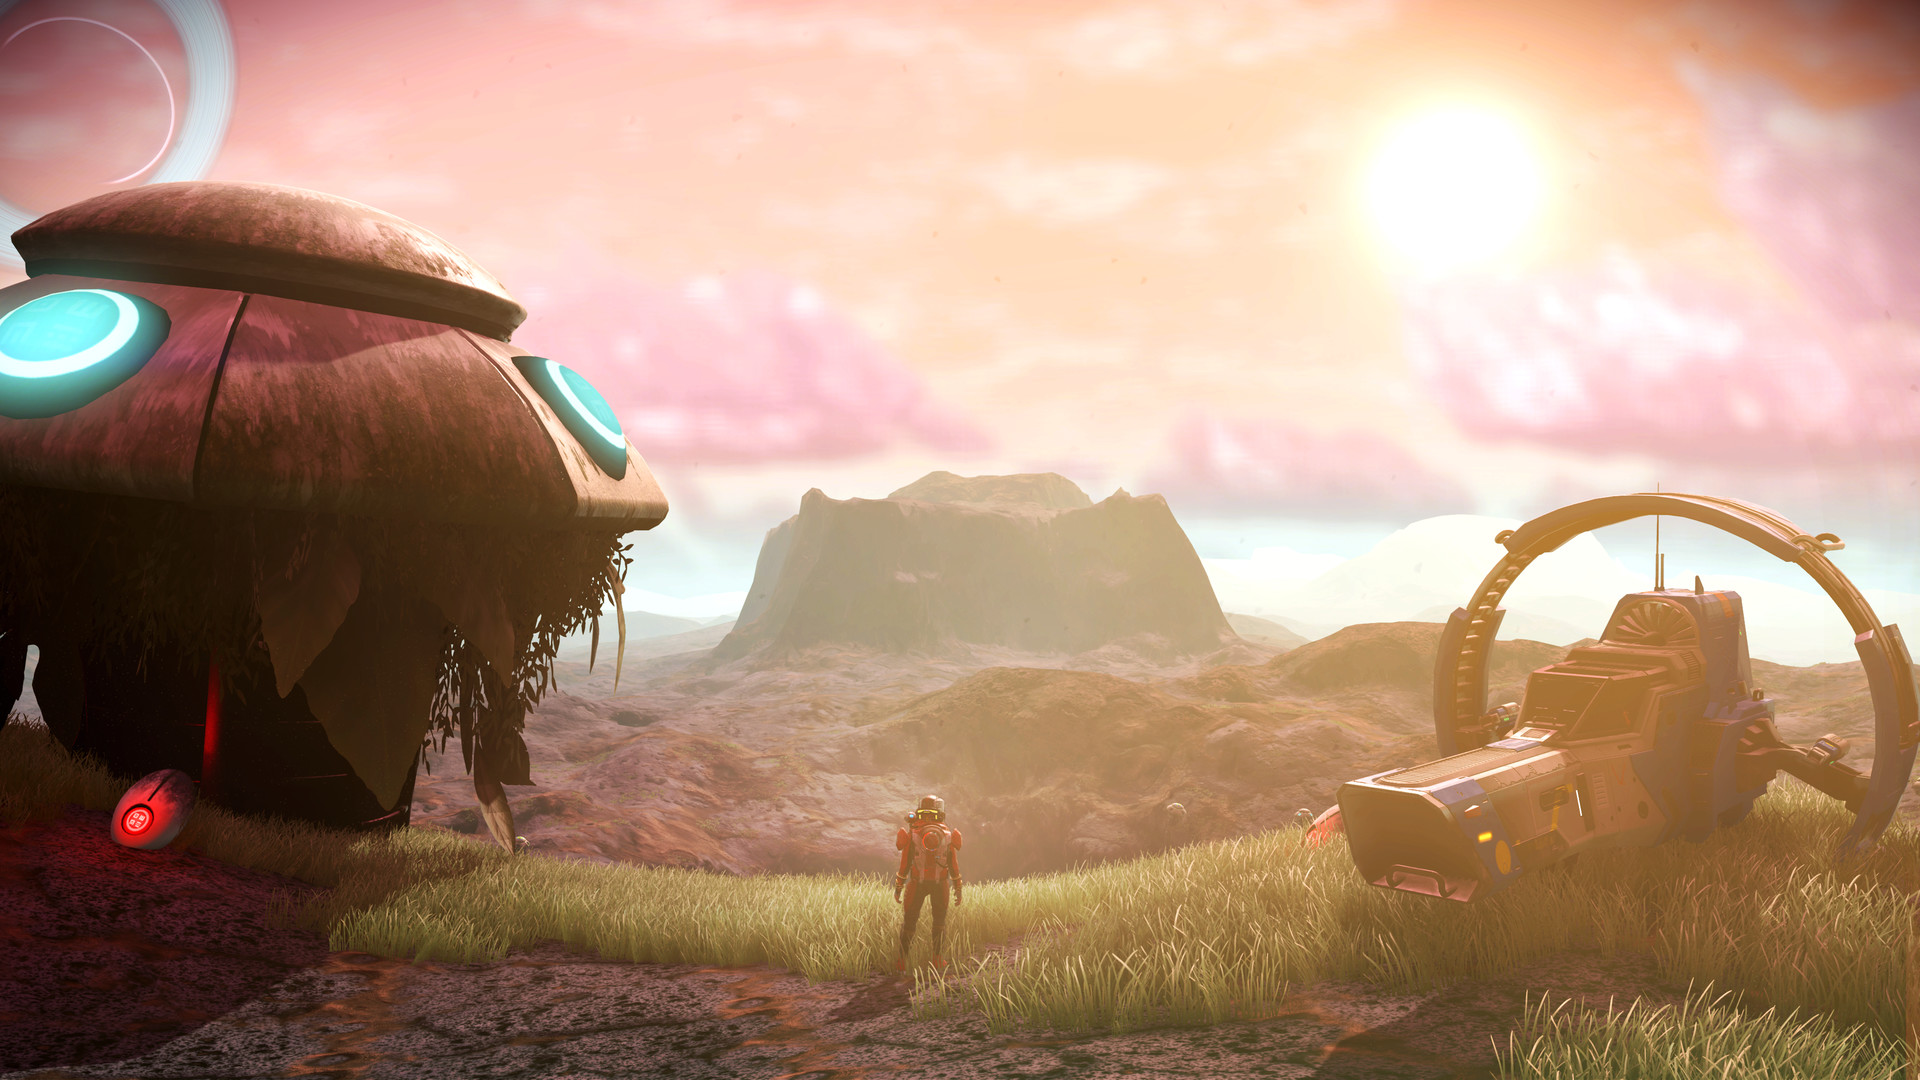 An explorer in No Man’s Sky stands looking out at the views of a sweeping, mountainous planet, with spaceship parts on either side